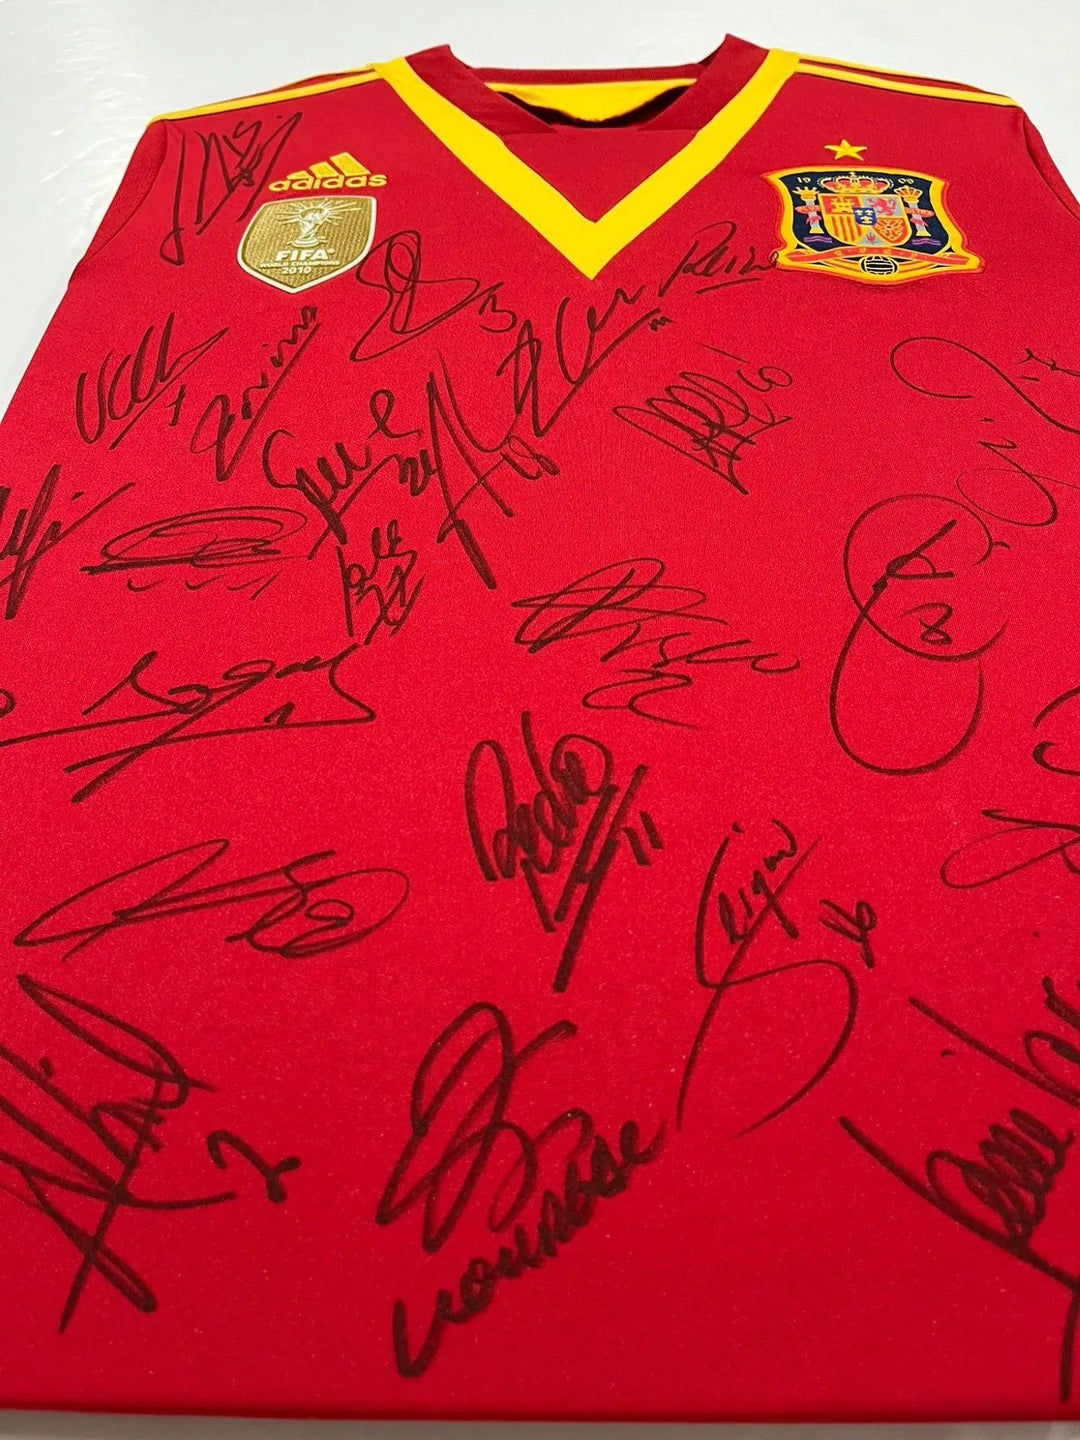 Spain World Cup 2010 Winners - Signed Soccer Shirt | All Signatures National Team